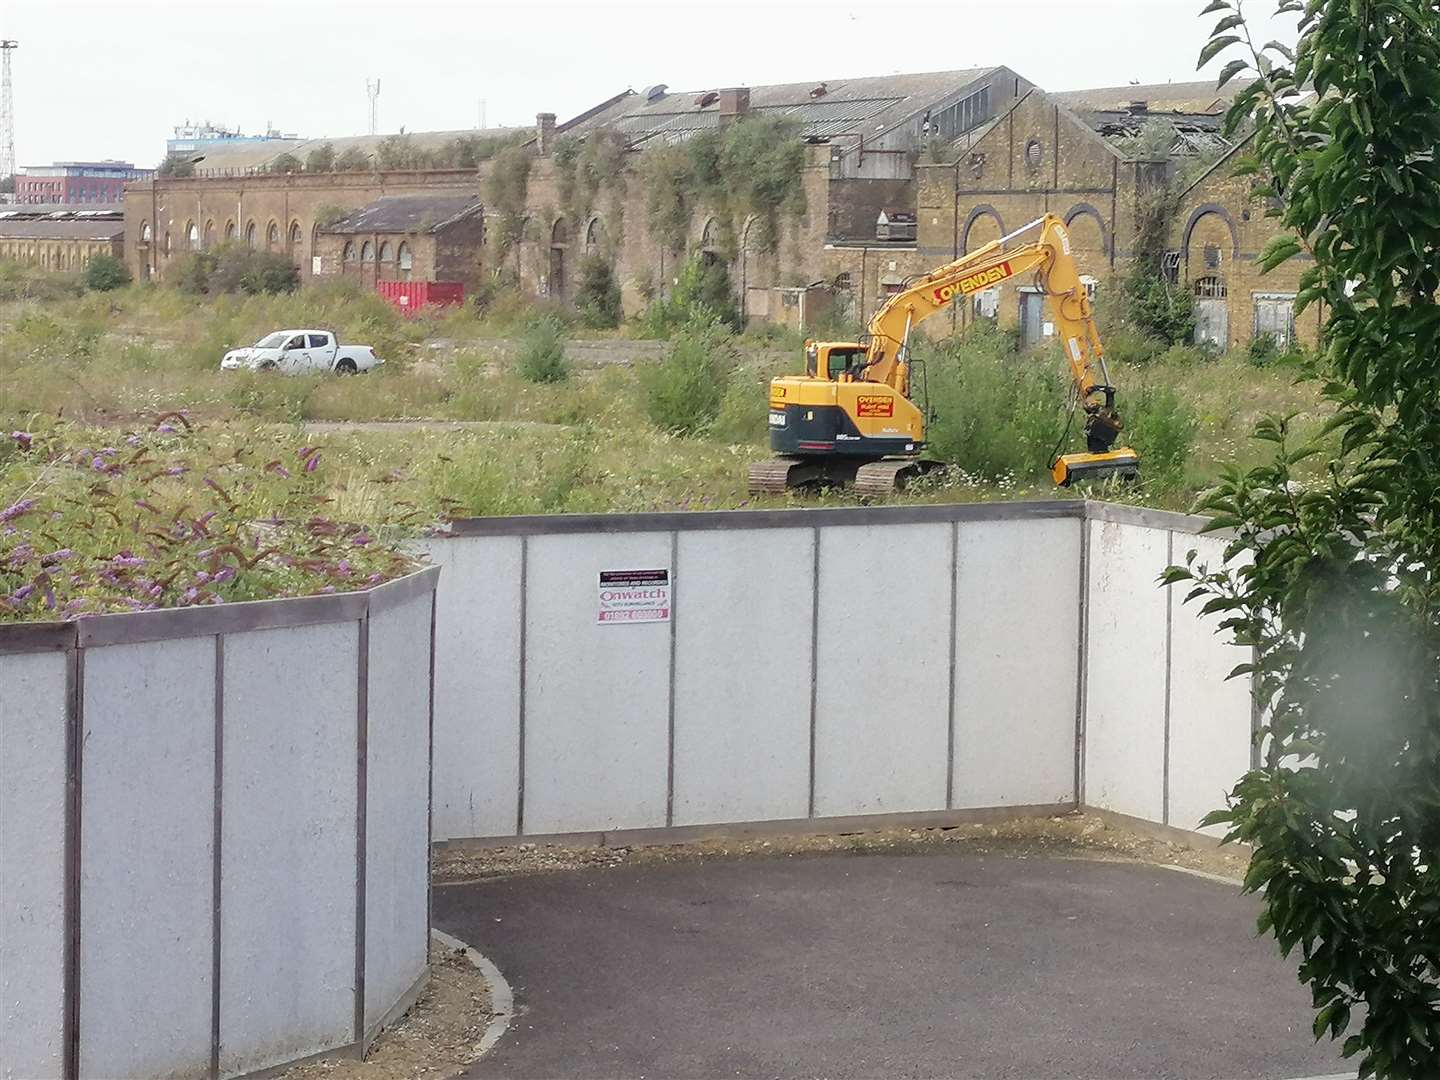 Work on the Newtown site started in the summer